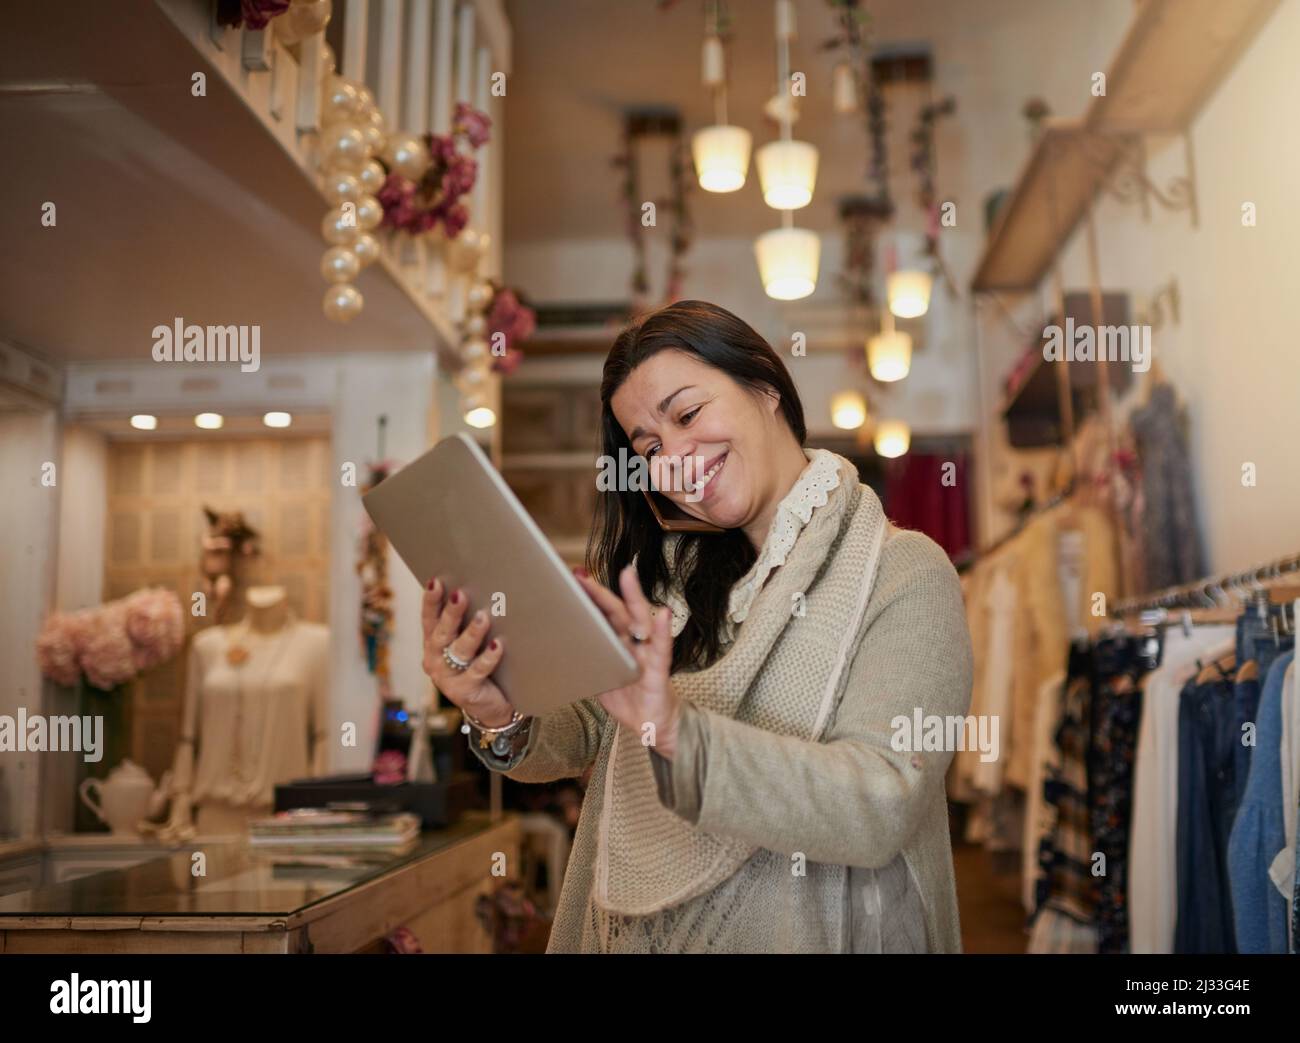 Tracking deliveries. Cropped shot of an attractive mature female entrepreneur working on a tablet in her self-owned boutique. Stock Photo